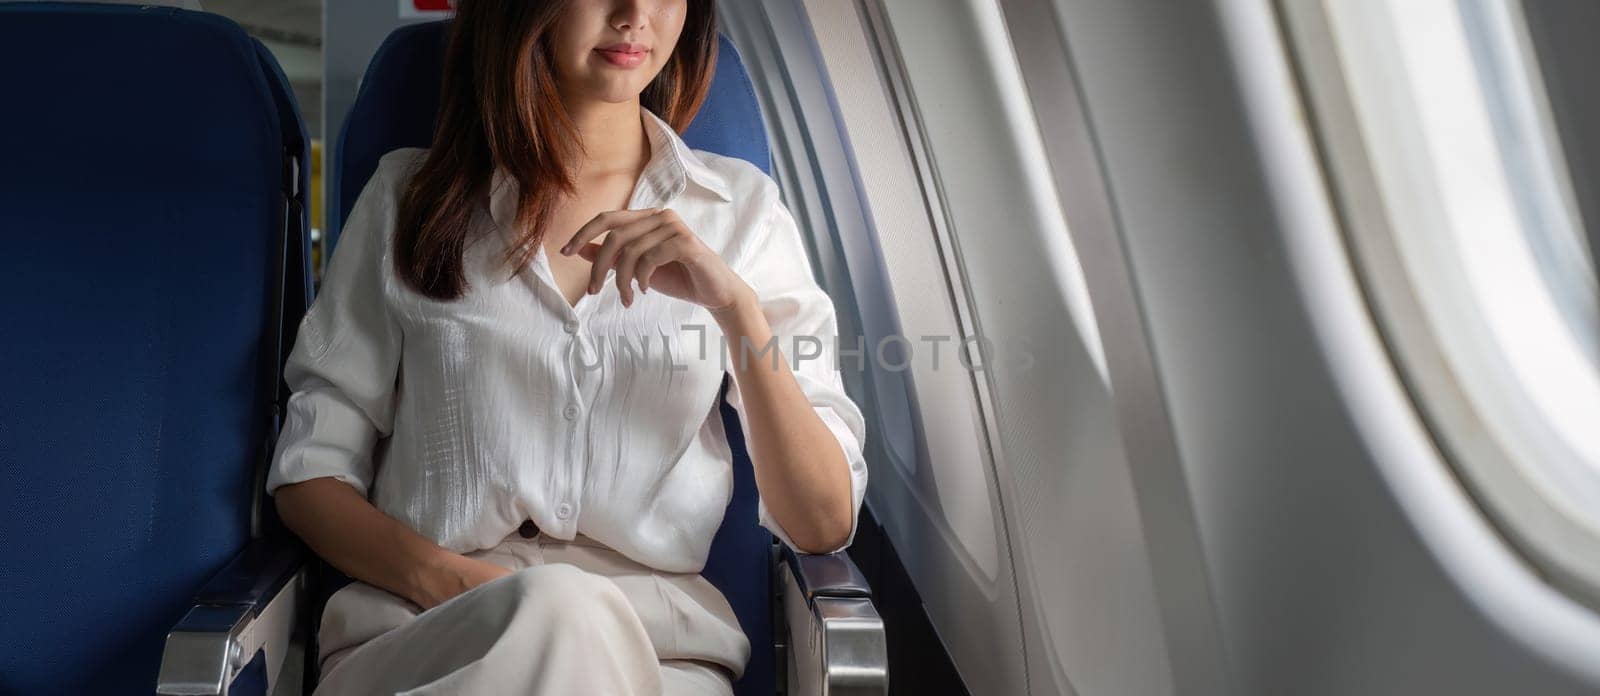 Young businesswoman seated in airplane cabin, wearing a white blouse, looking out the window, representing modern professional travel lifestyle.